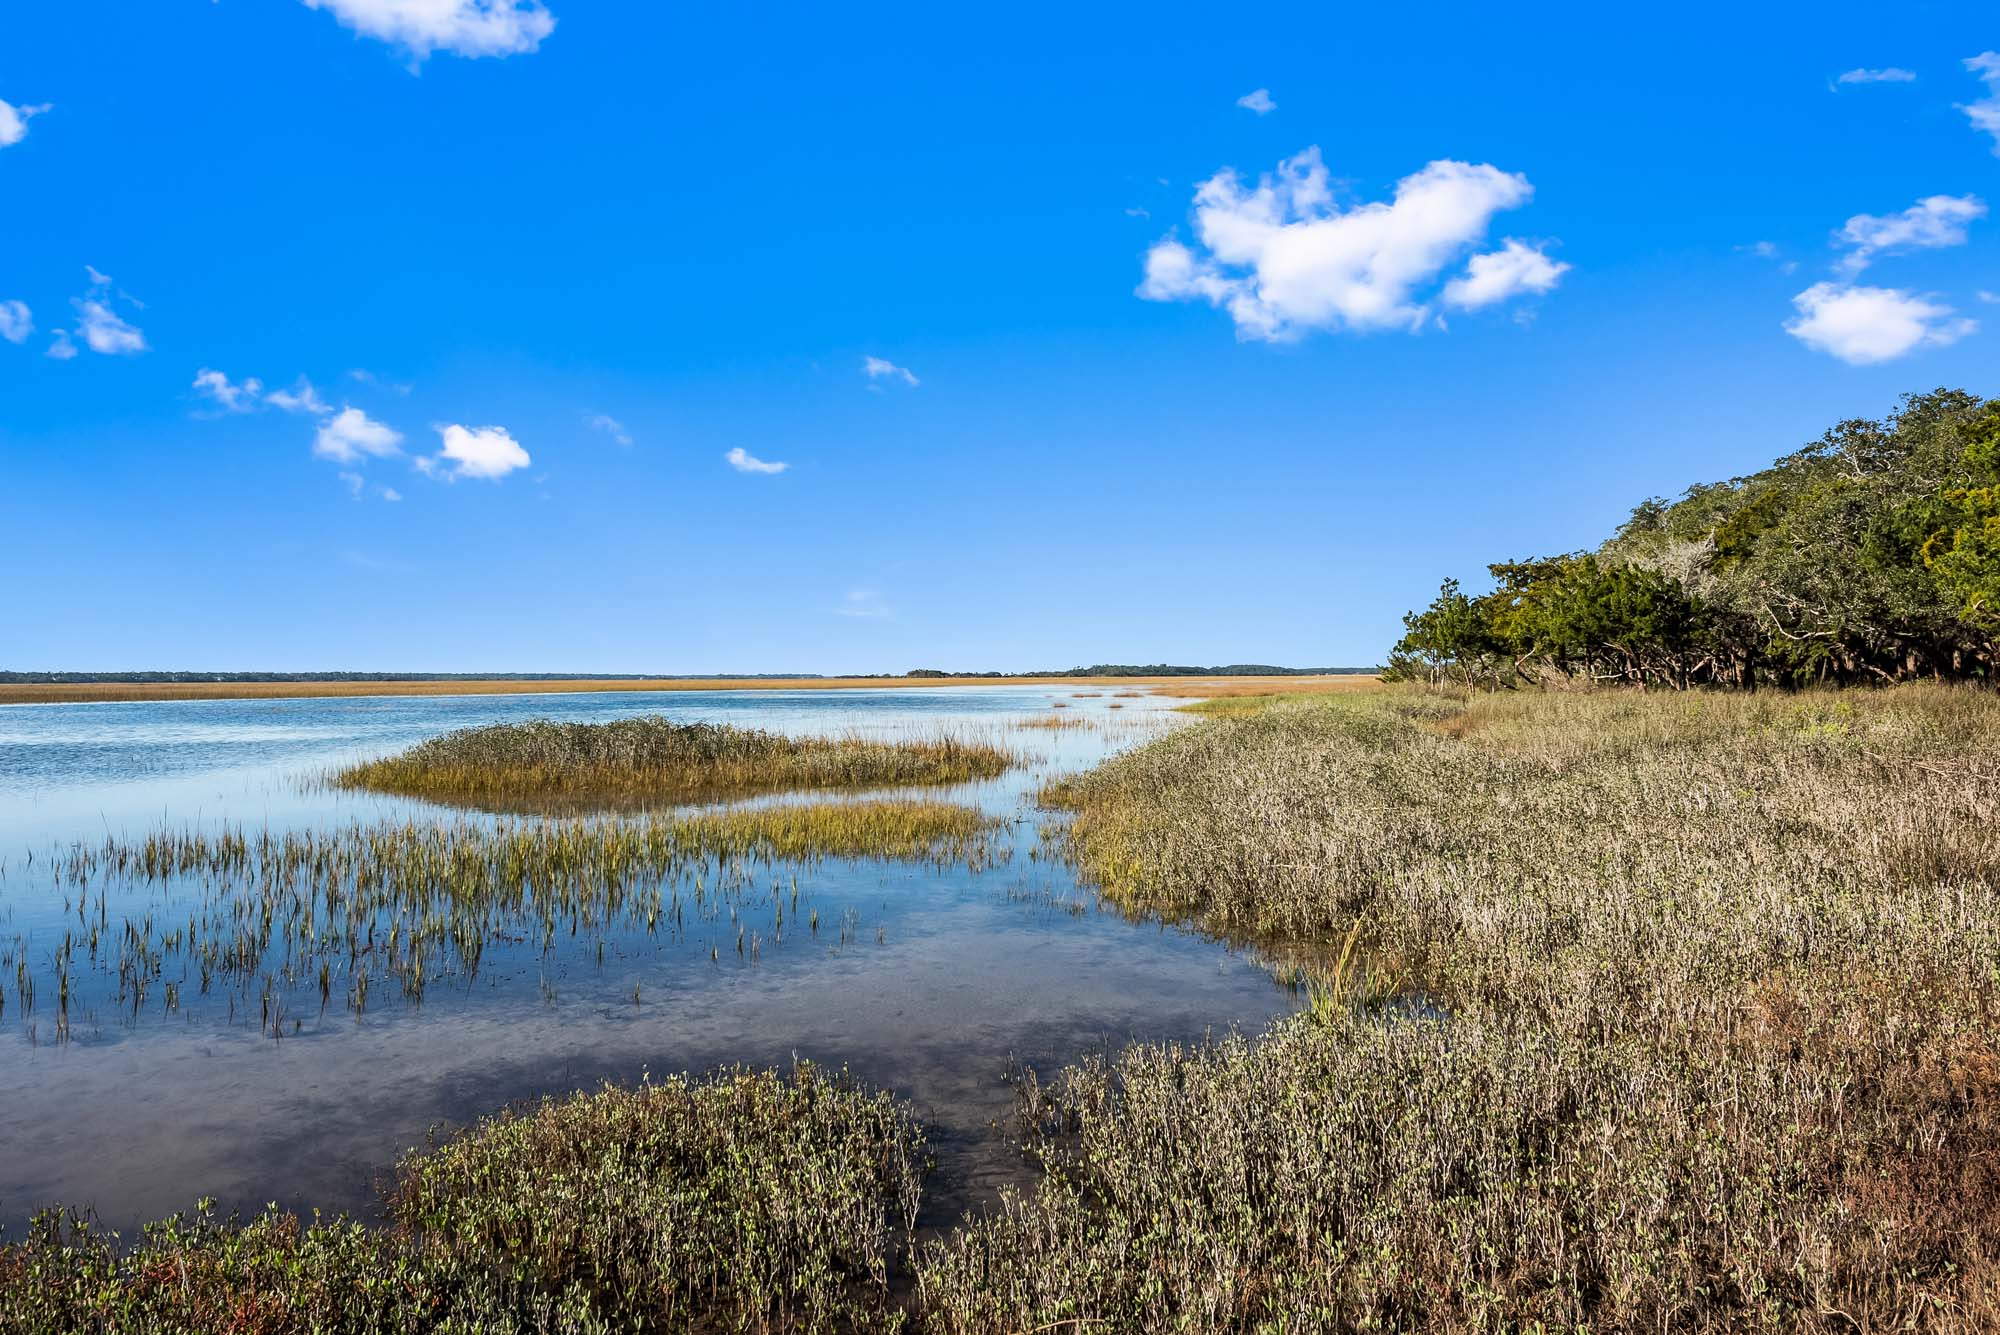 Legareville Farms, Agricultural estates on Johns Island, featuring ample homesites along the marshes of Chaplin's Creek, overlooking the Kiawah River